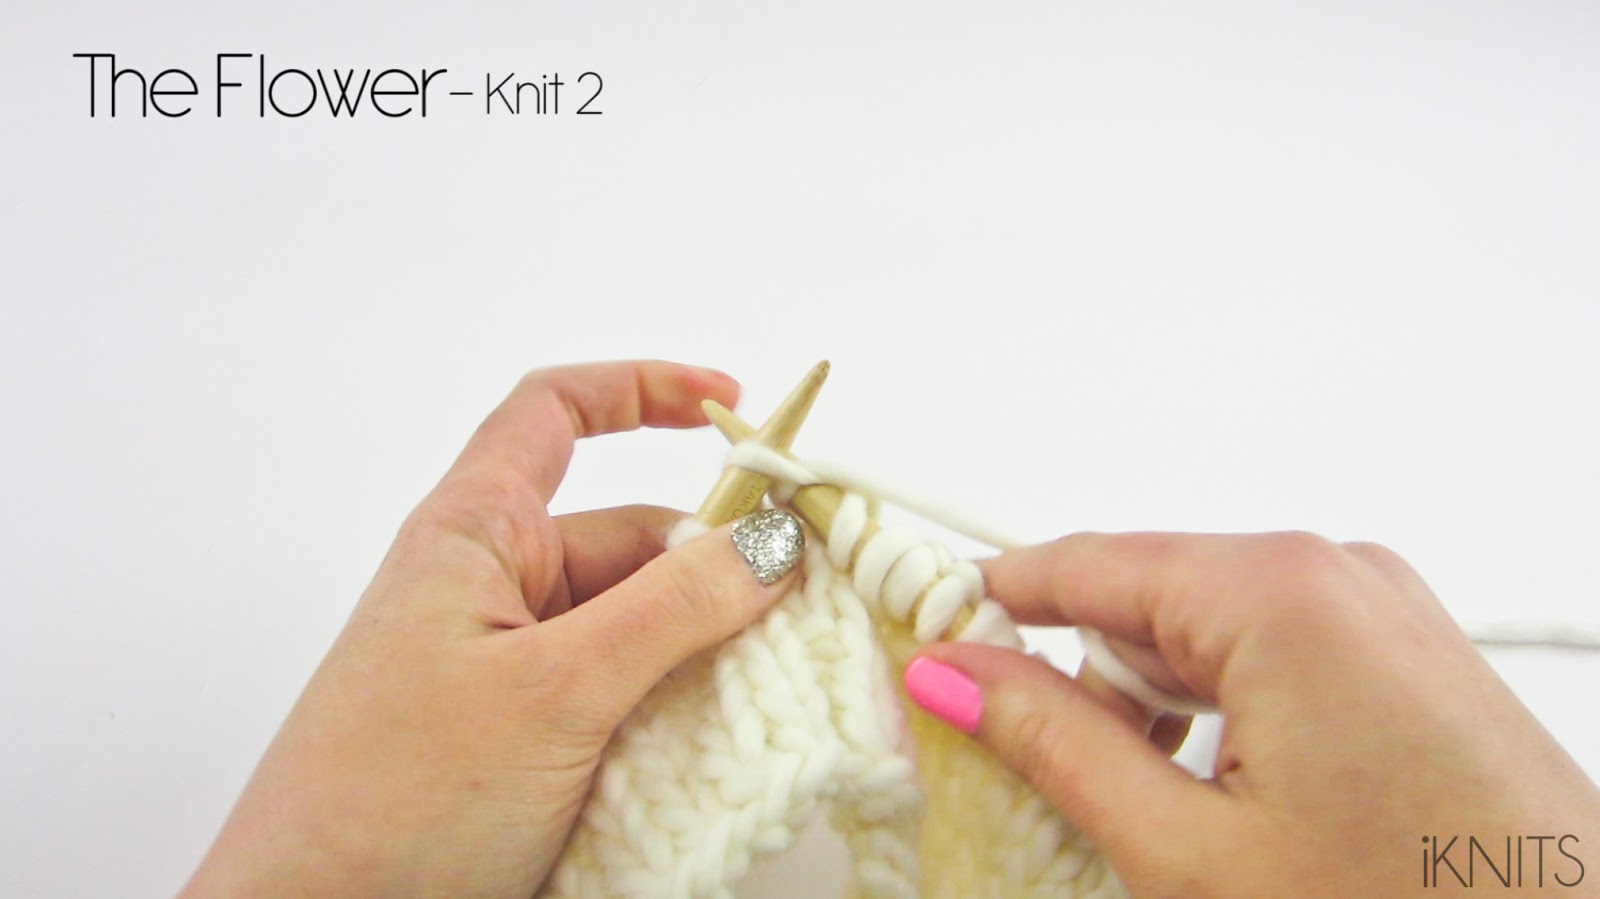 HOW TO KNIT DANDELION STITCH | AND PHOTO TUTORIAL - iKNITS